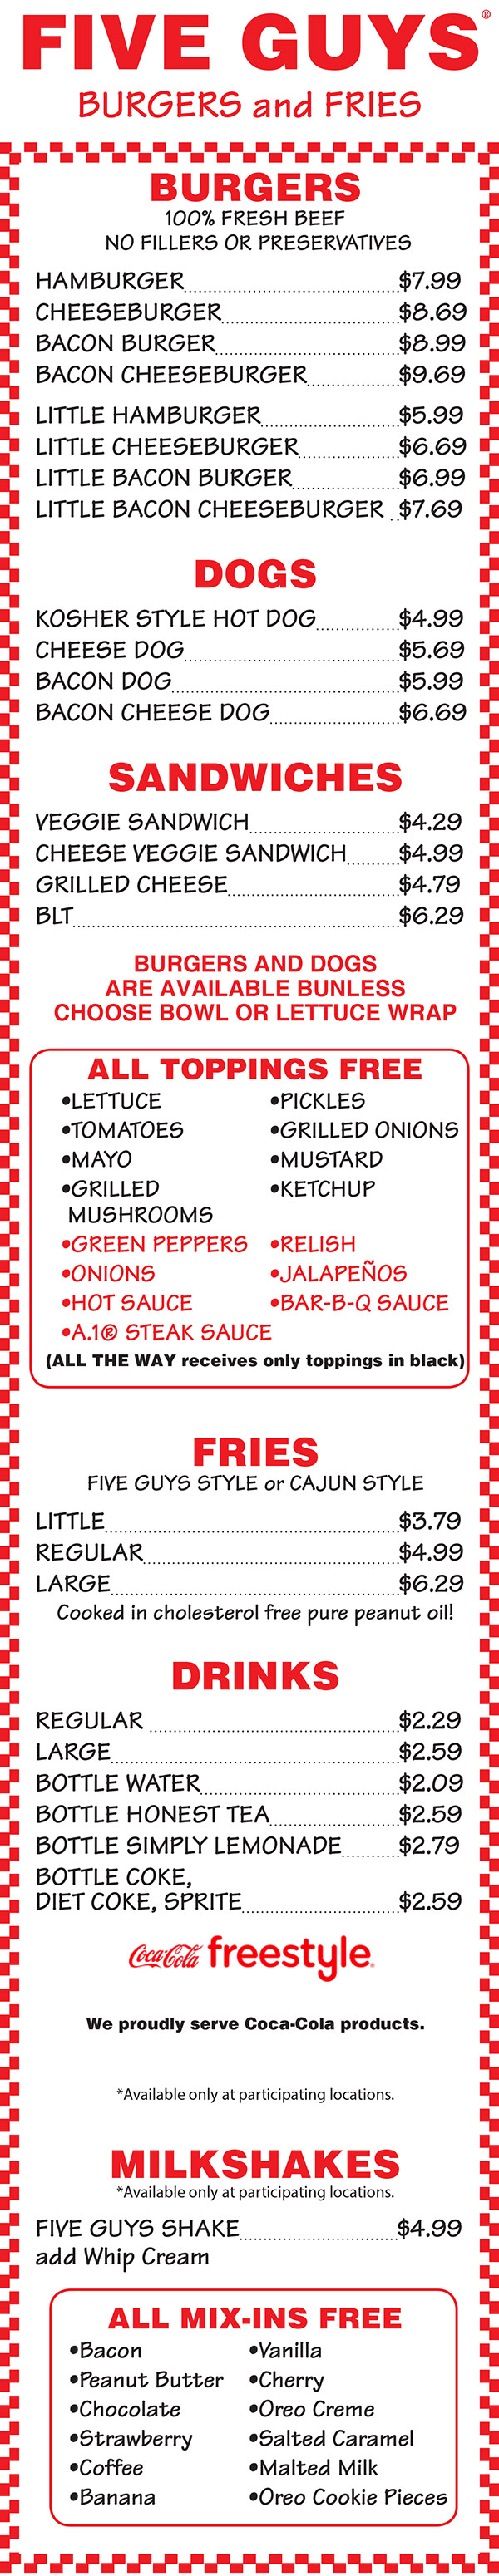 Five Guys Burger and Fries Menu - Lincoln Nebraska - Provided by Metro Dining Delivery, Five Guys Burgers & Fries  Restaurant Delivery Service, Five Guys Burgers & Fries  Food Delivery, Five Guys Burgers & Fries  Catering, Five Guys Burgers & Fries  Carry-Out, Five Guys Burgers & Fries , Restaurant Delivery, Lincoln Nebraska, NE, Nebraska, Lincoln, Five Guys Burgers & Fries  Restaurnat Delivery Service, Delivery Service, Five Guys Burgers & Fries  Food Delivery Service, Five Guys Burgers & Fries  room service, 402-474-7335, Five Guys Burgers & Fries  take-out, Five Guys Burgers & Fries  home delivery, Five Guys Burgers & Fries  office delivery, Five Guys Burgers & Fries  delivery, FAST, Five Guys Burgers & Fries  Menu Lincoln NE, concierge, Courier Delivery Service, Courier Service, errand Courier Delivery Service, Five Guys Burgers & Fries , Delivery Menu, Five Guys Burgers & Fries  Menu, Metro Dining Delivery, metrodiningdelivery.com, Metro Dining, Lincoln dining Delivery, Lincoln Nebraska Dining Delivery, Restaurant Delivery Service, Lincoln Nebraska Delivery, Food Delivery, Lincoln NE Food Delivery, Lincoln NE Restaurant Delivery, Lincoln NE Beer Delivery, Carry Out, Catering, Lincoln's ONLY Restaurnat Delivery Service, Delivery for only $2.99, Cheap Food Delivery, Room Service, Party Service, Office Meetings, Food Catering Lincoln NE, Restaurnat Deliver From Any Restaurant in Lincoln Nebraska, Lincoln's Premier Restaurant Delivery Service, Hot Food Delivery Lincoln Nebraska,